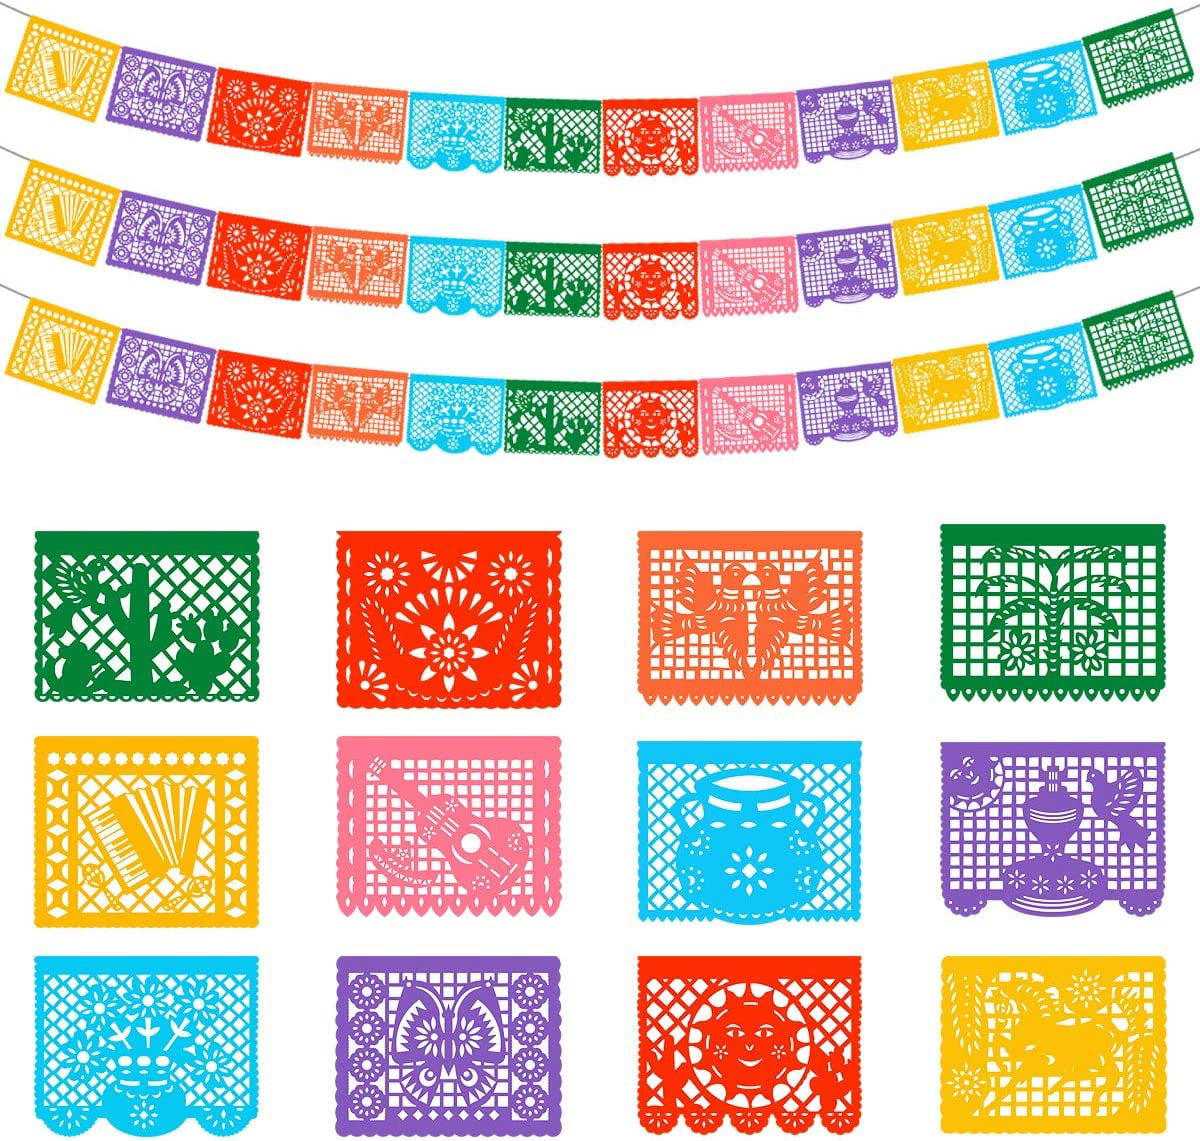 ECOOSTAR 35PCS Fiesta Paper Fan Party Decorations Set, Cinco De Mayo Pom  Poms, Fiesta Party Decorations, Mexican Birthday Party, Haning Swirl